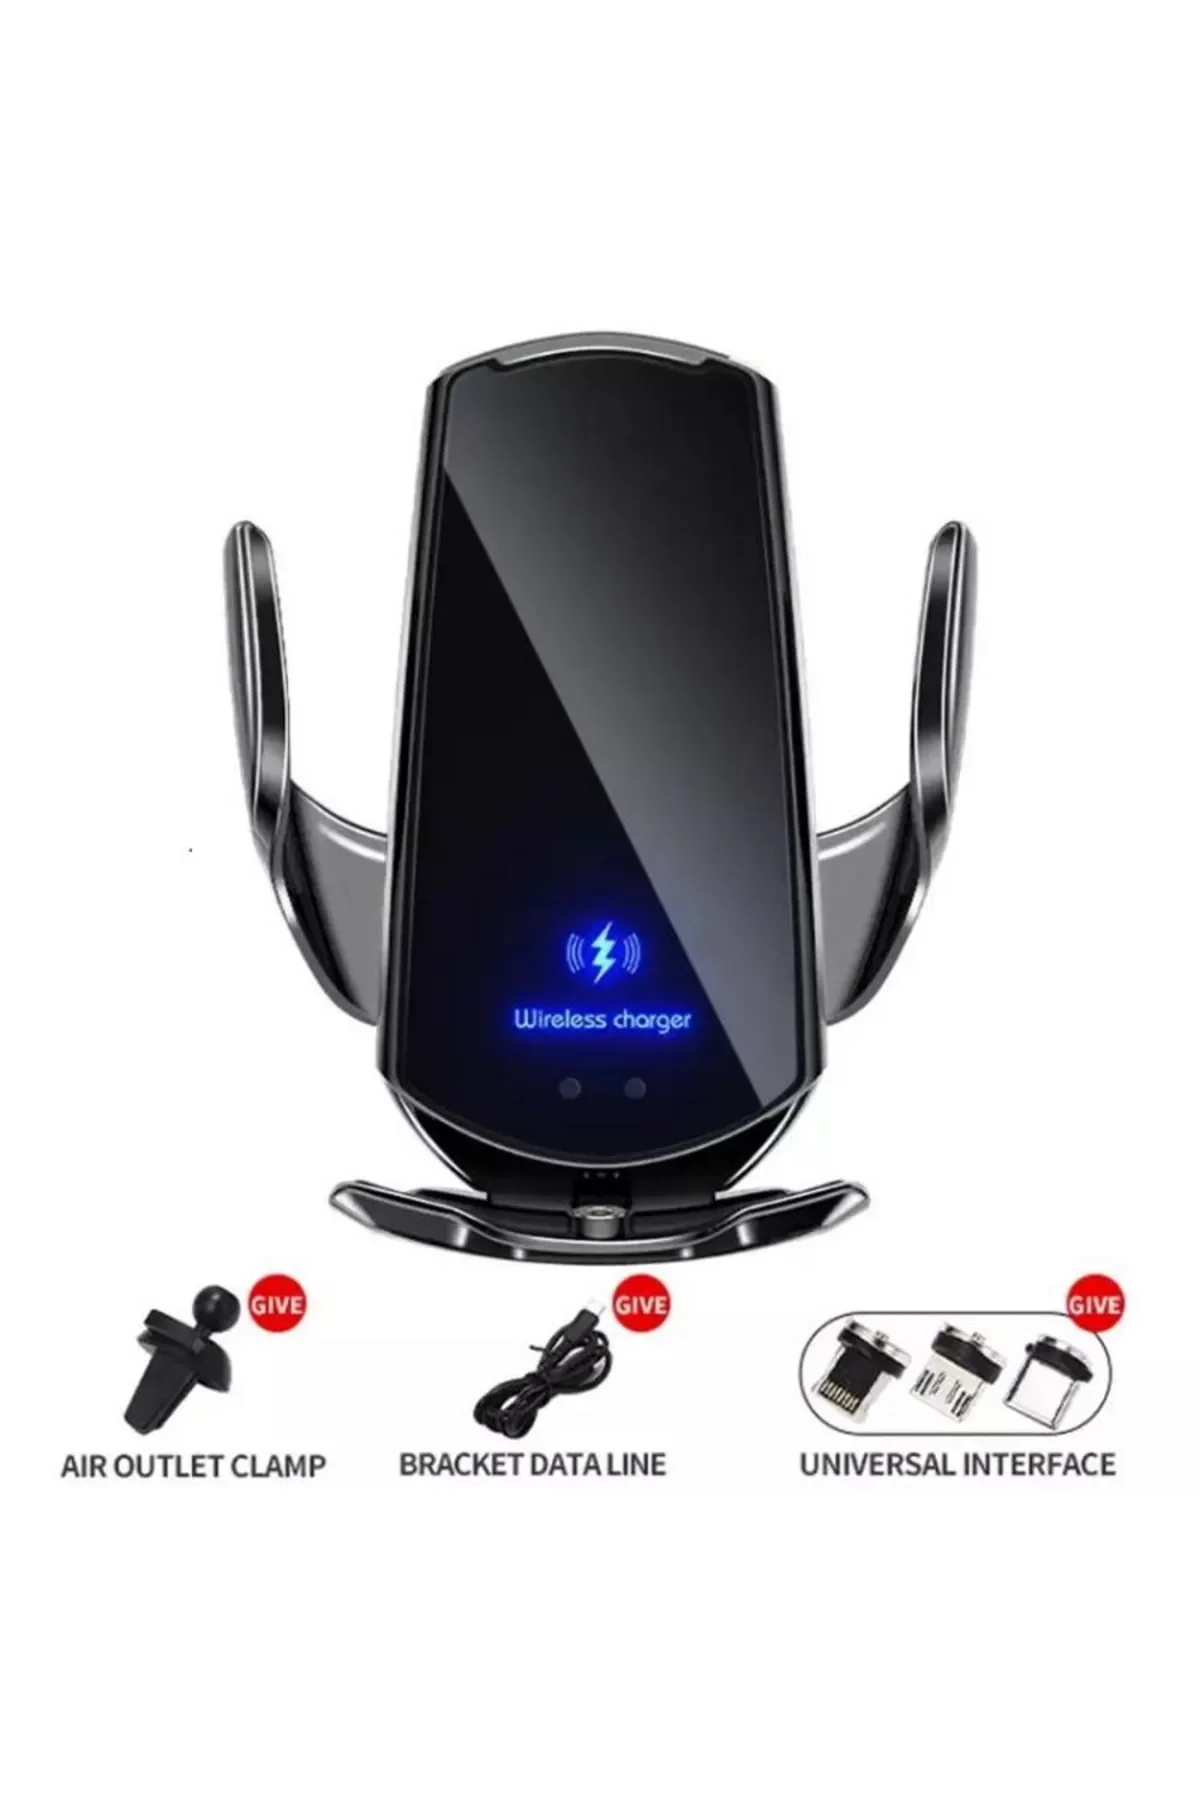 car-wireless-charger-magnetic-in-car-phone-holder-with-sensor-opening-closing-arms-fast-charging-station-air-vent-stand-item